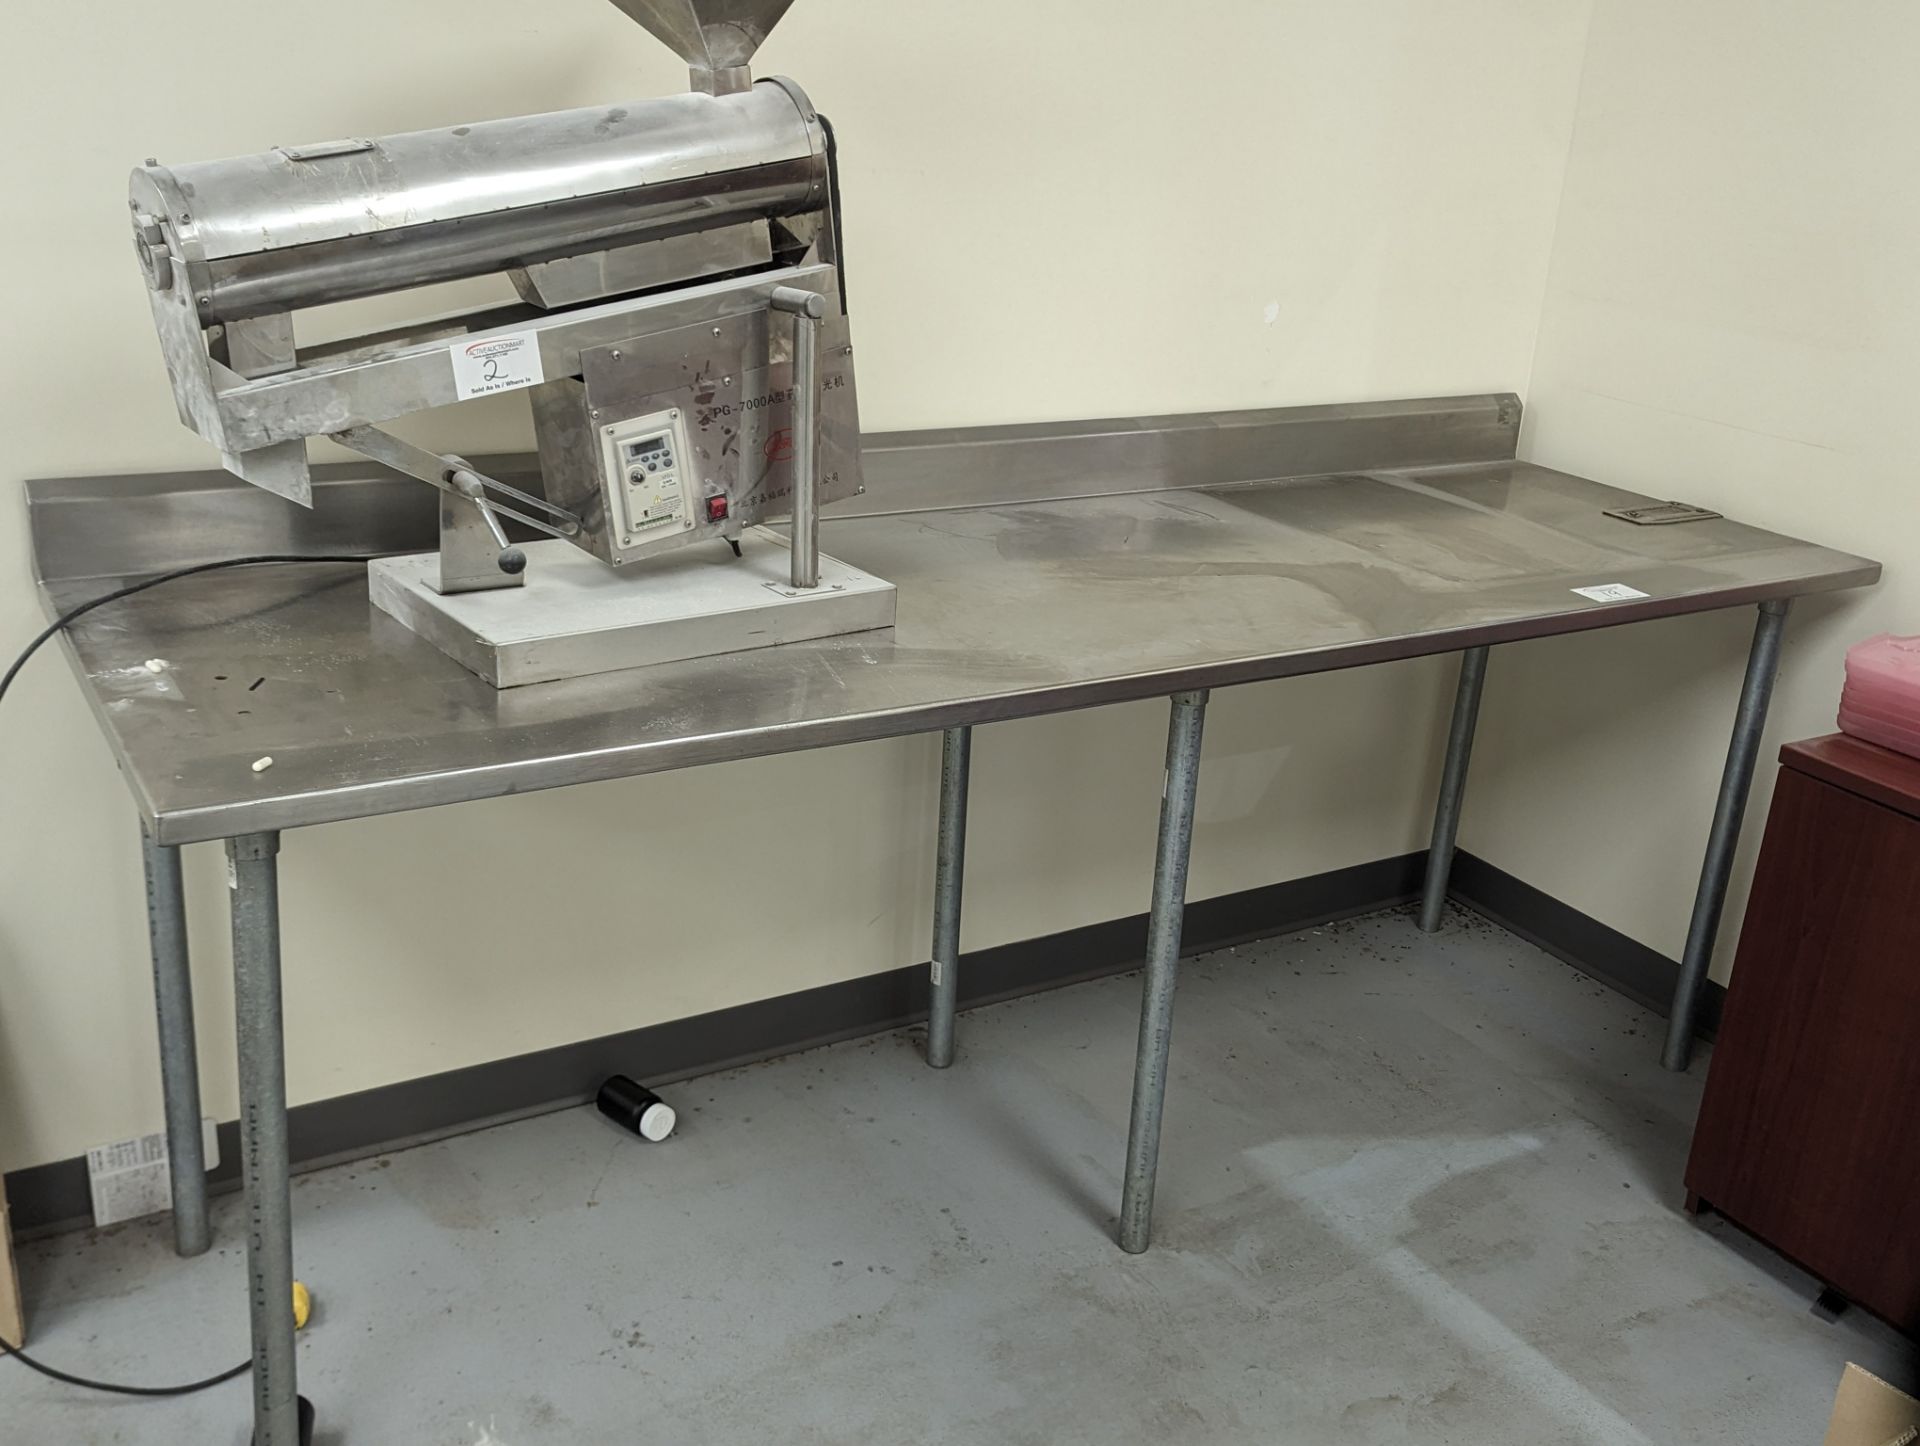 8 ft Stainless Steel Work Table